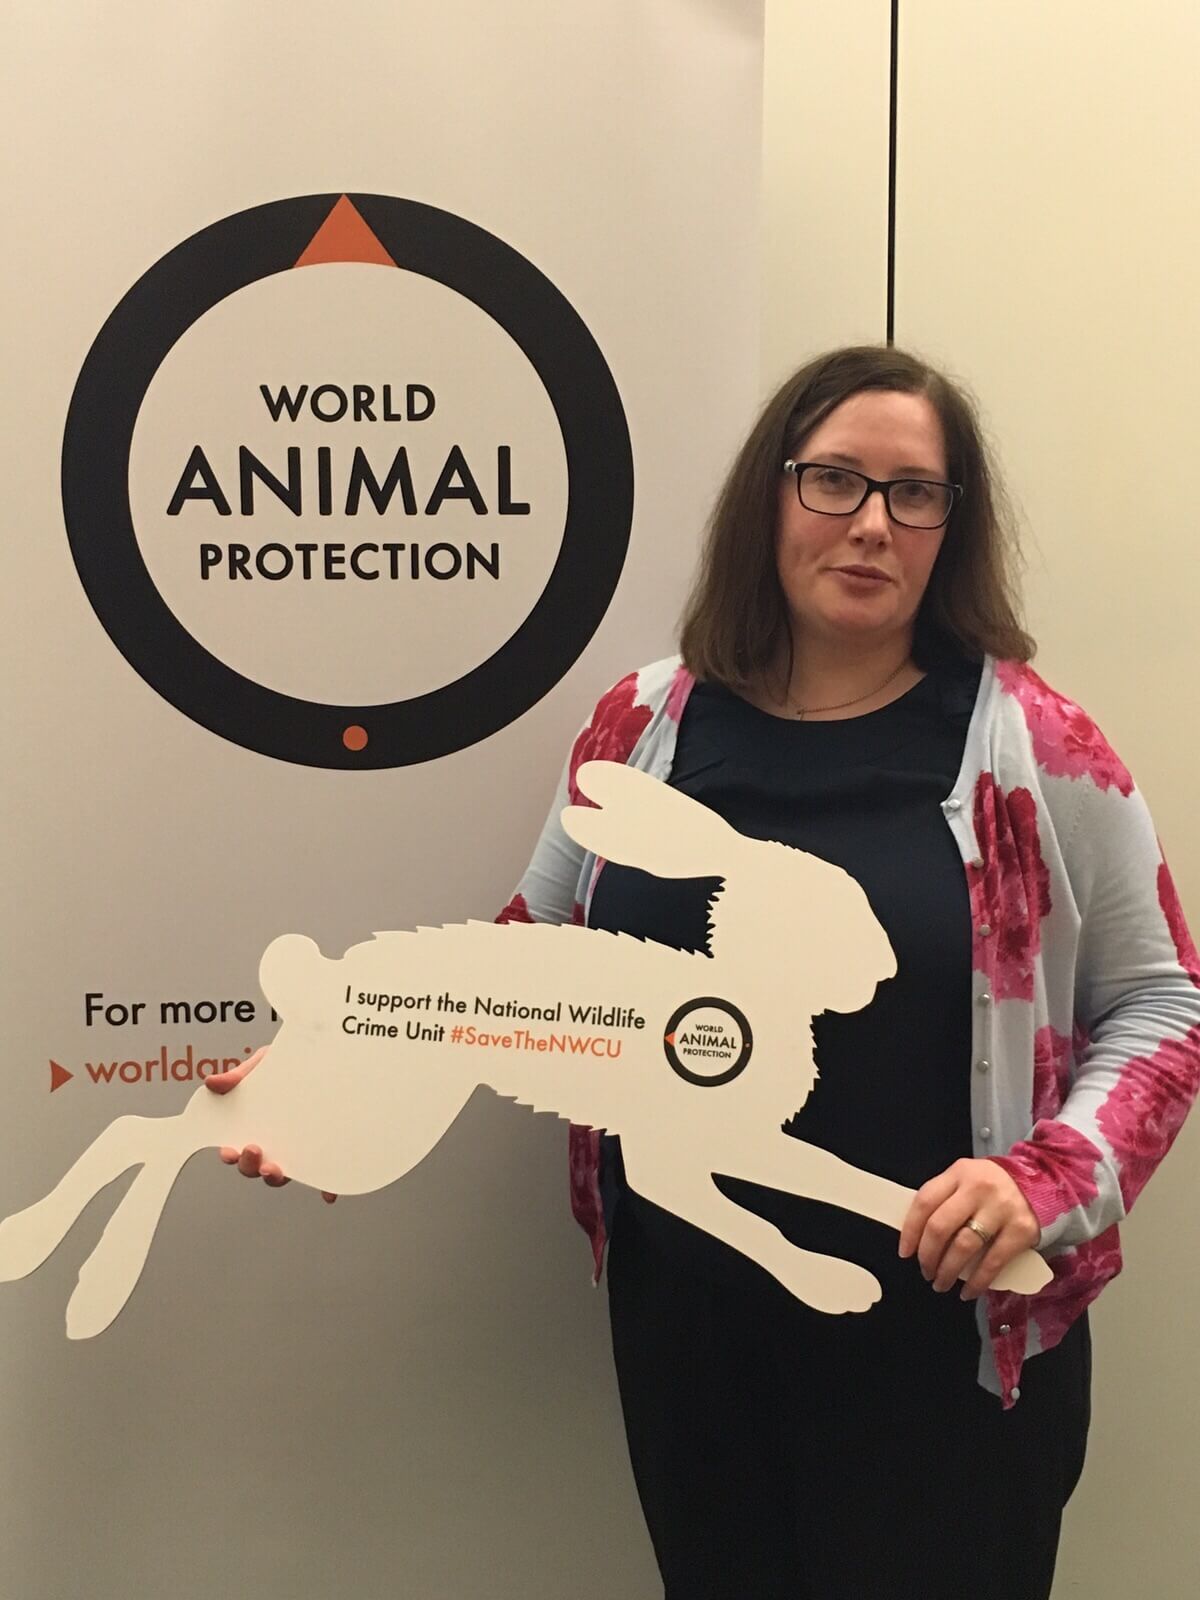 Emma joins World Animal Protection at Parliament to save the National Wildlife Crime Unit